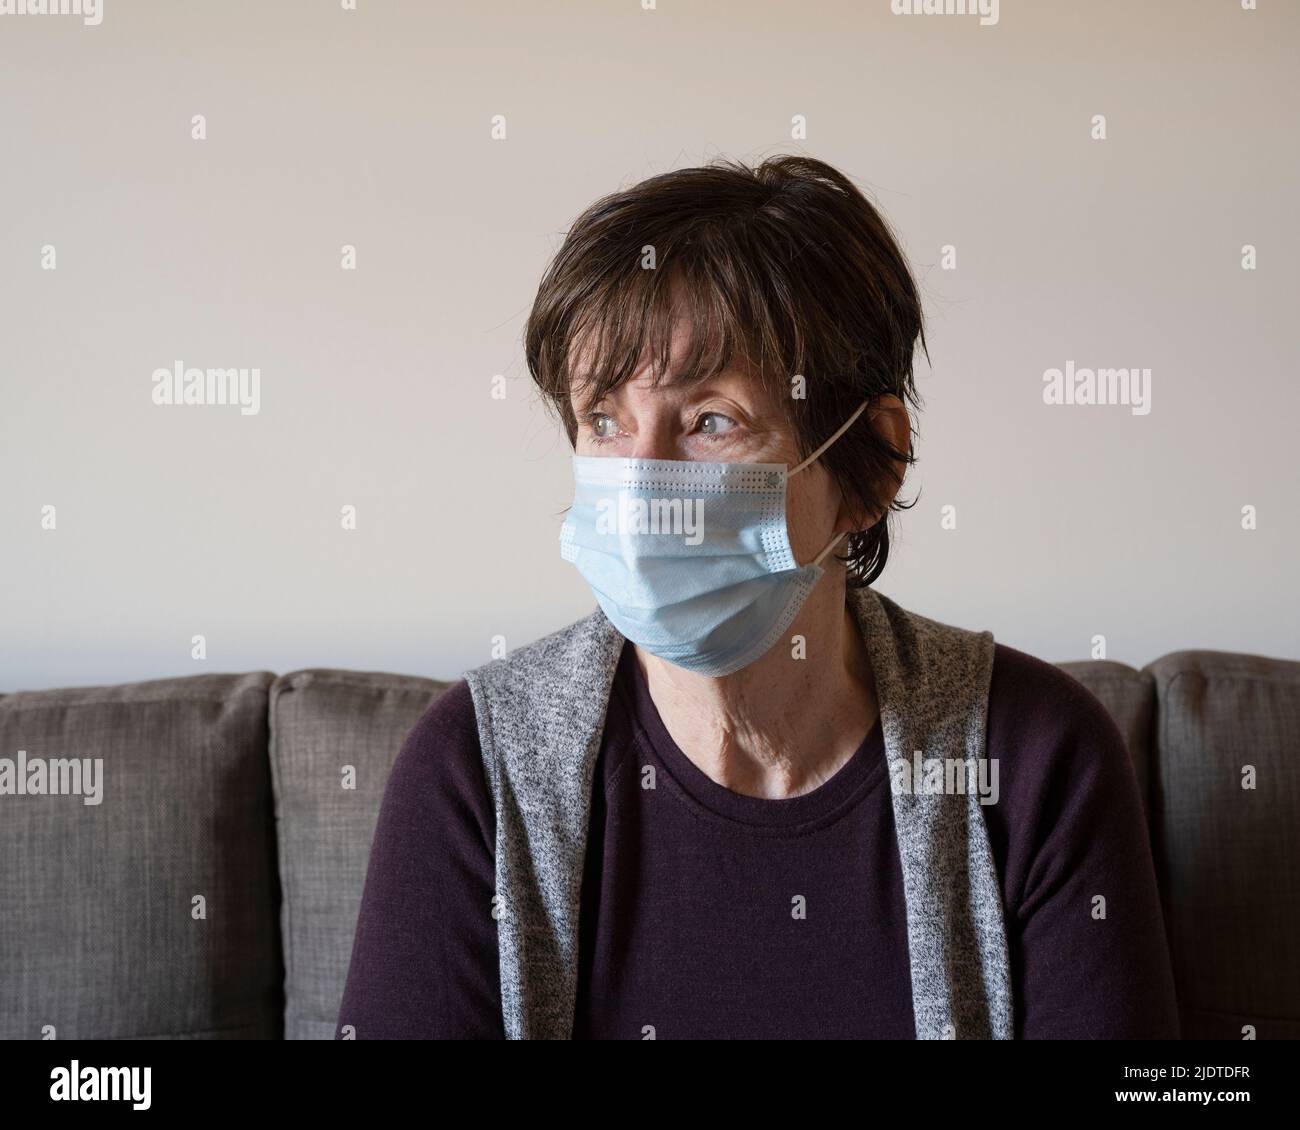 WOMAN WITH CONCERNED LOOK WEARING MASK, SANTA FE, NM, USA Stock Photo